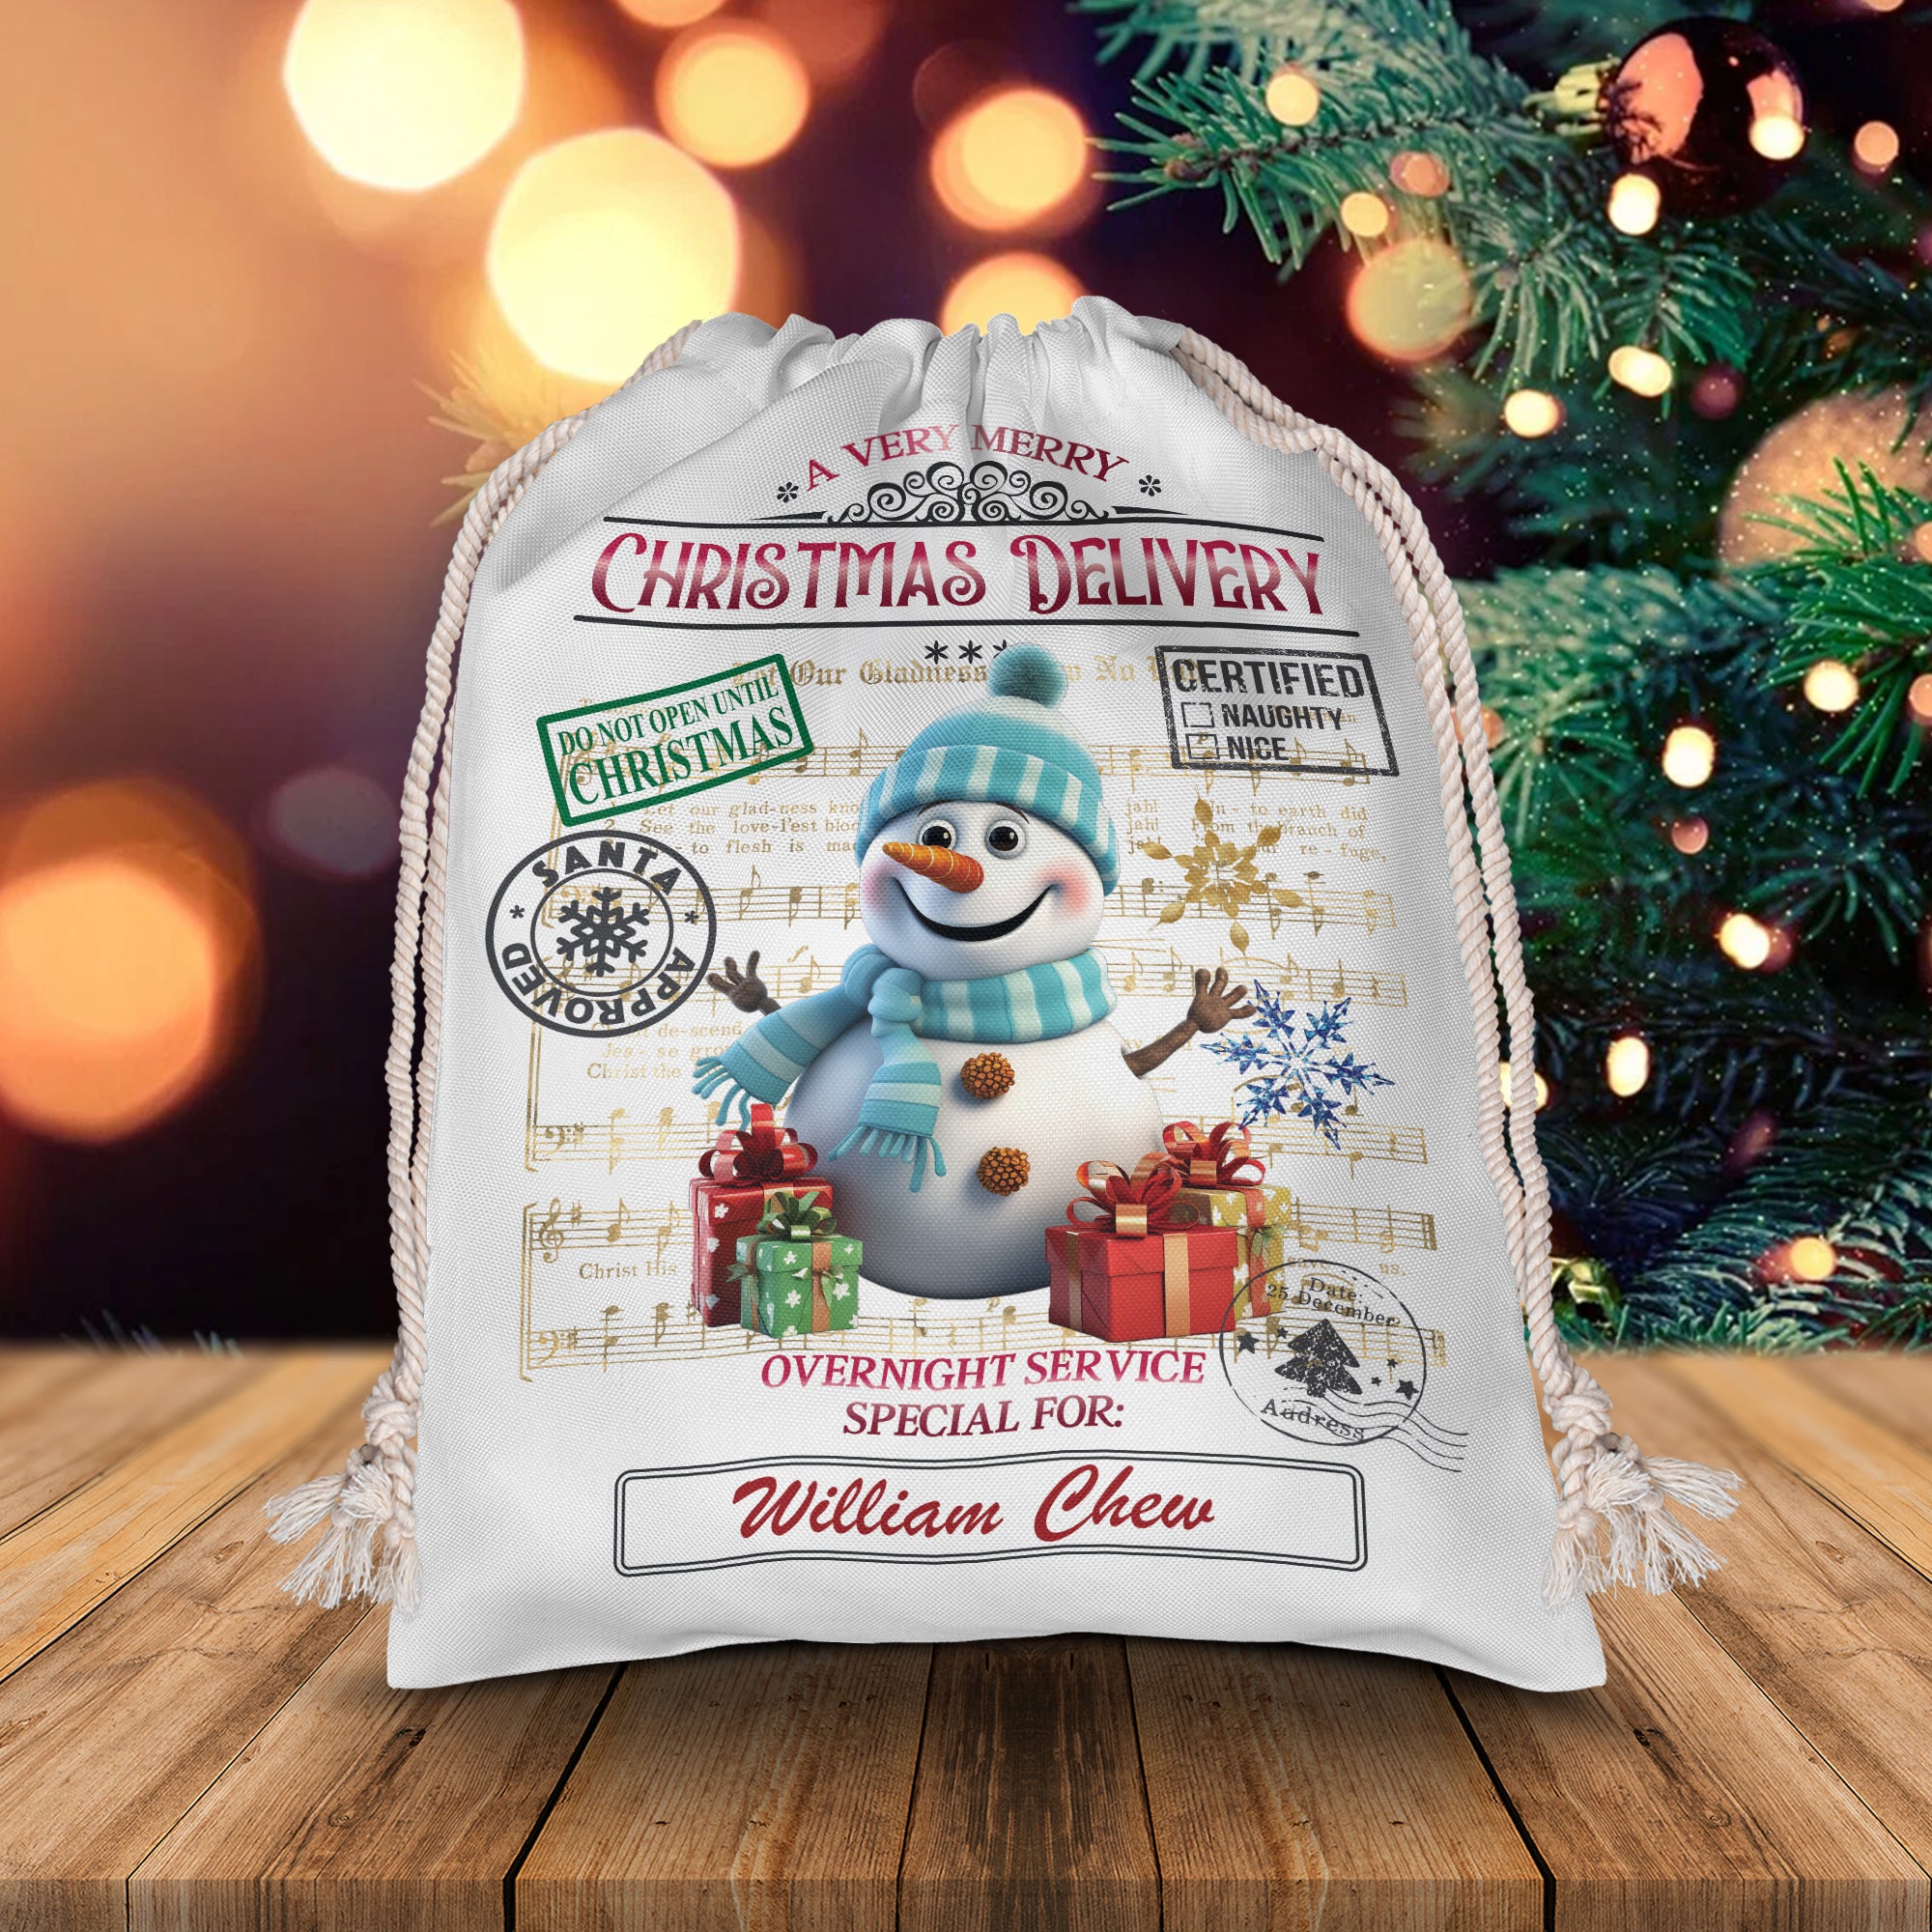 A Very Merry Christmas Delivery Overnight Service - Personalized String Bag, Christmas Gift, Gift For Family